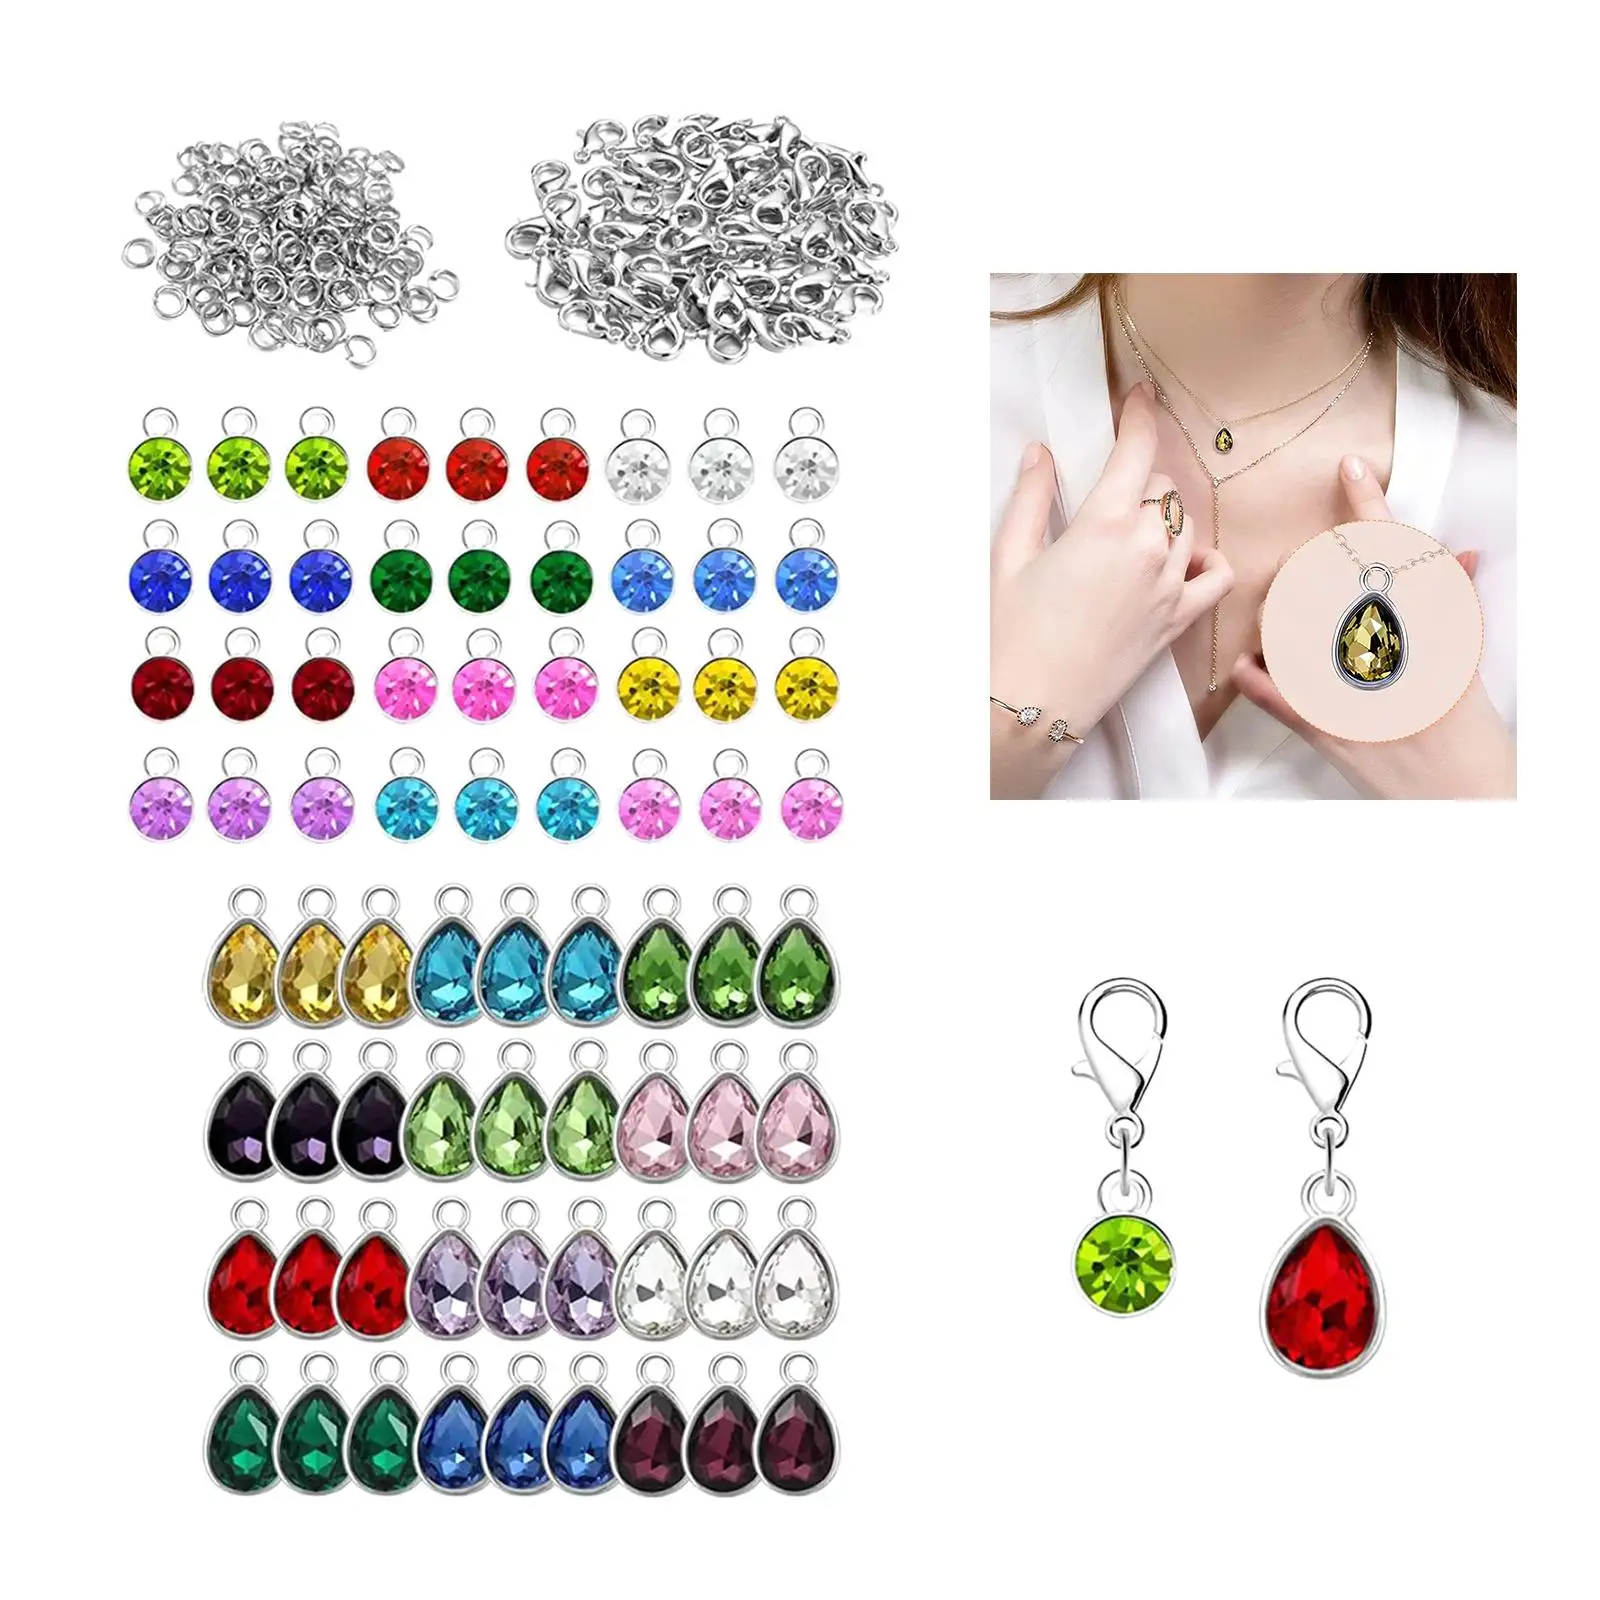 Modern Crystal Birthstone Charms Pendants Beads Pendant Zinc Alloy Mixed Color Gift for Jewellery Making Kit Crafting Home Decor